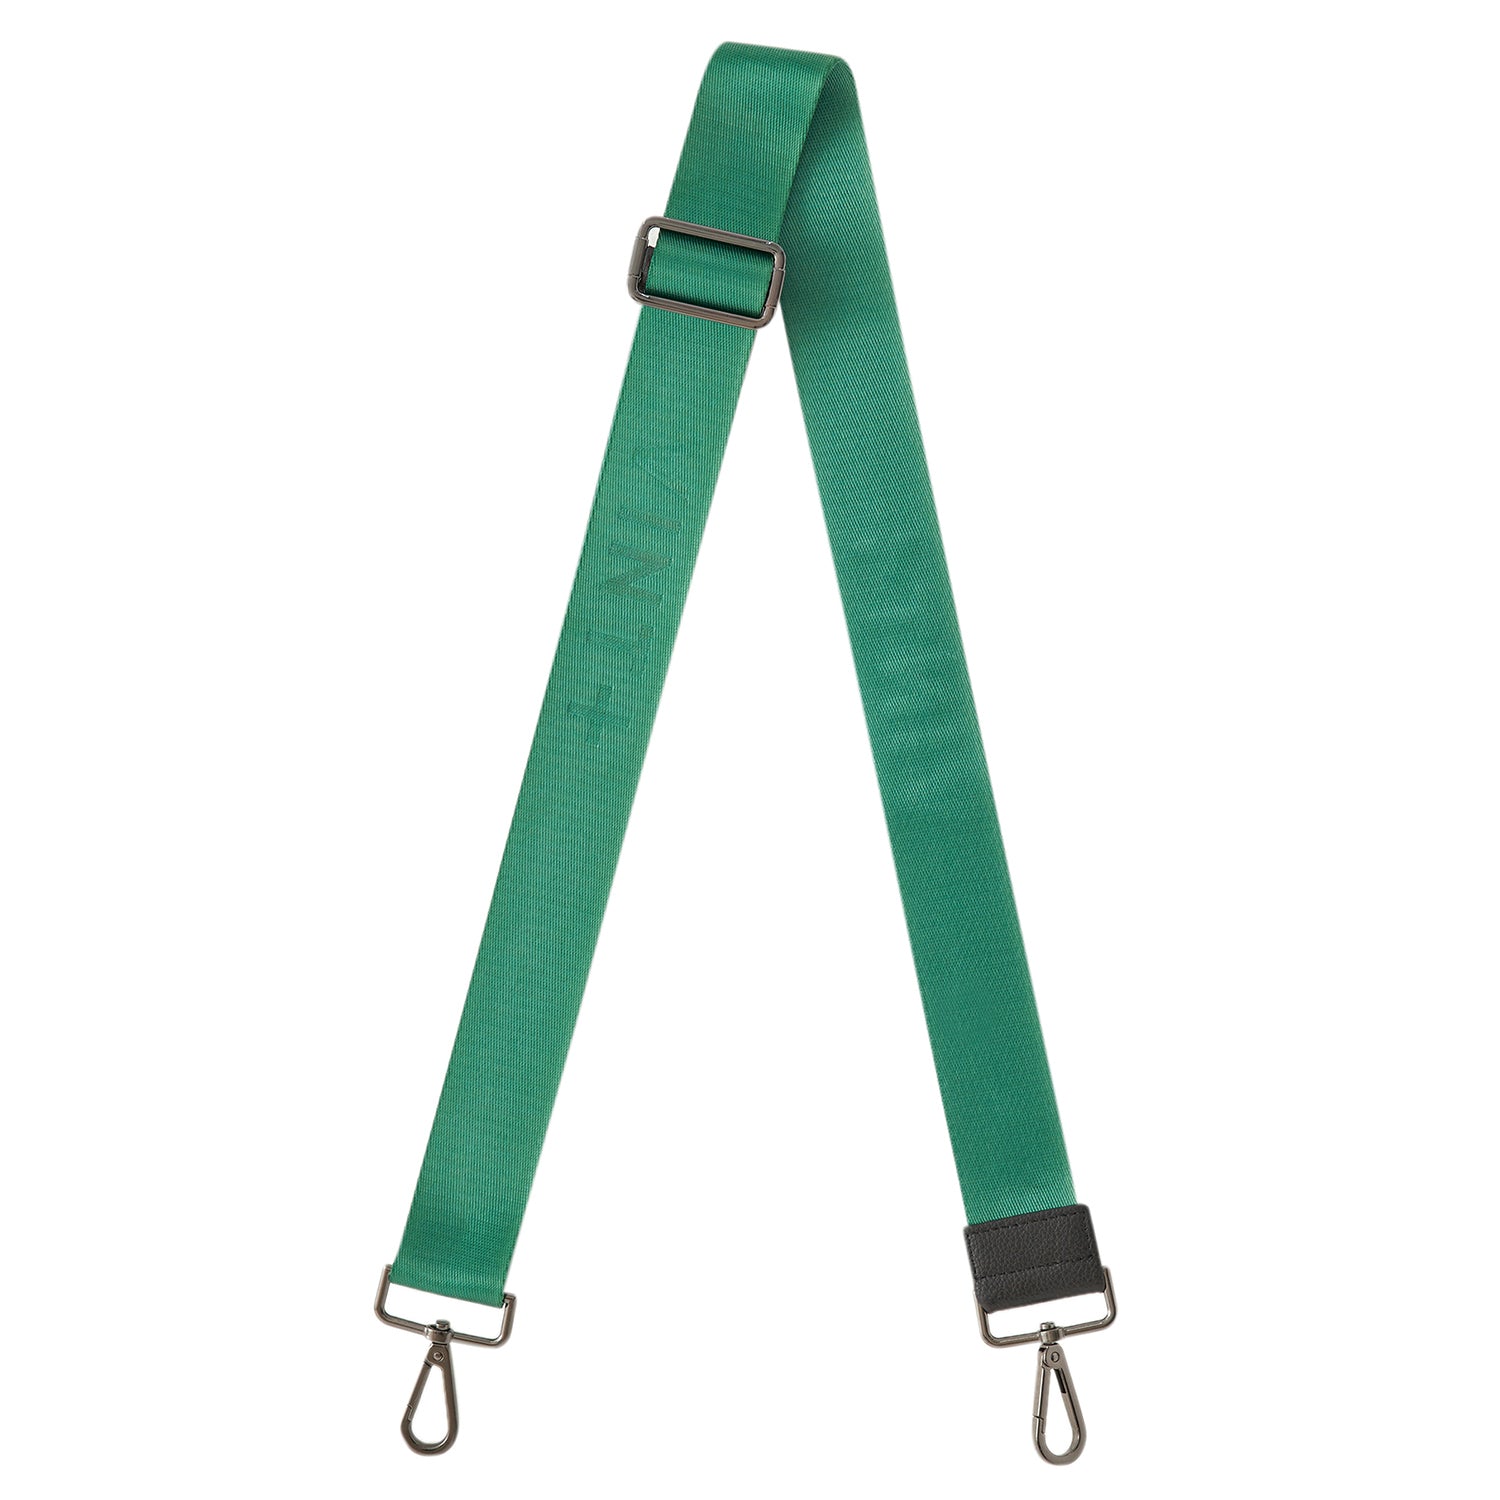 CARRY STRAP - GREEN